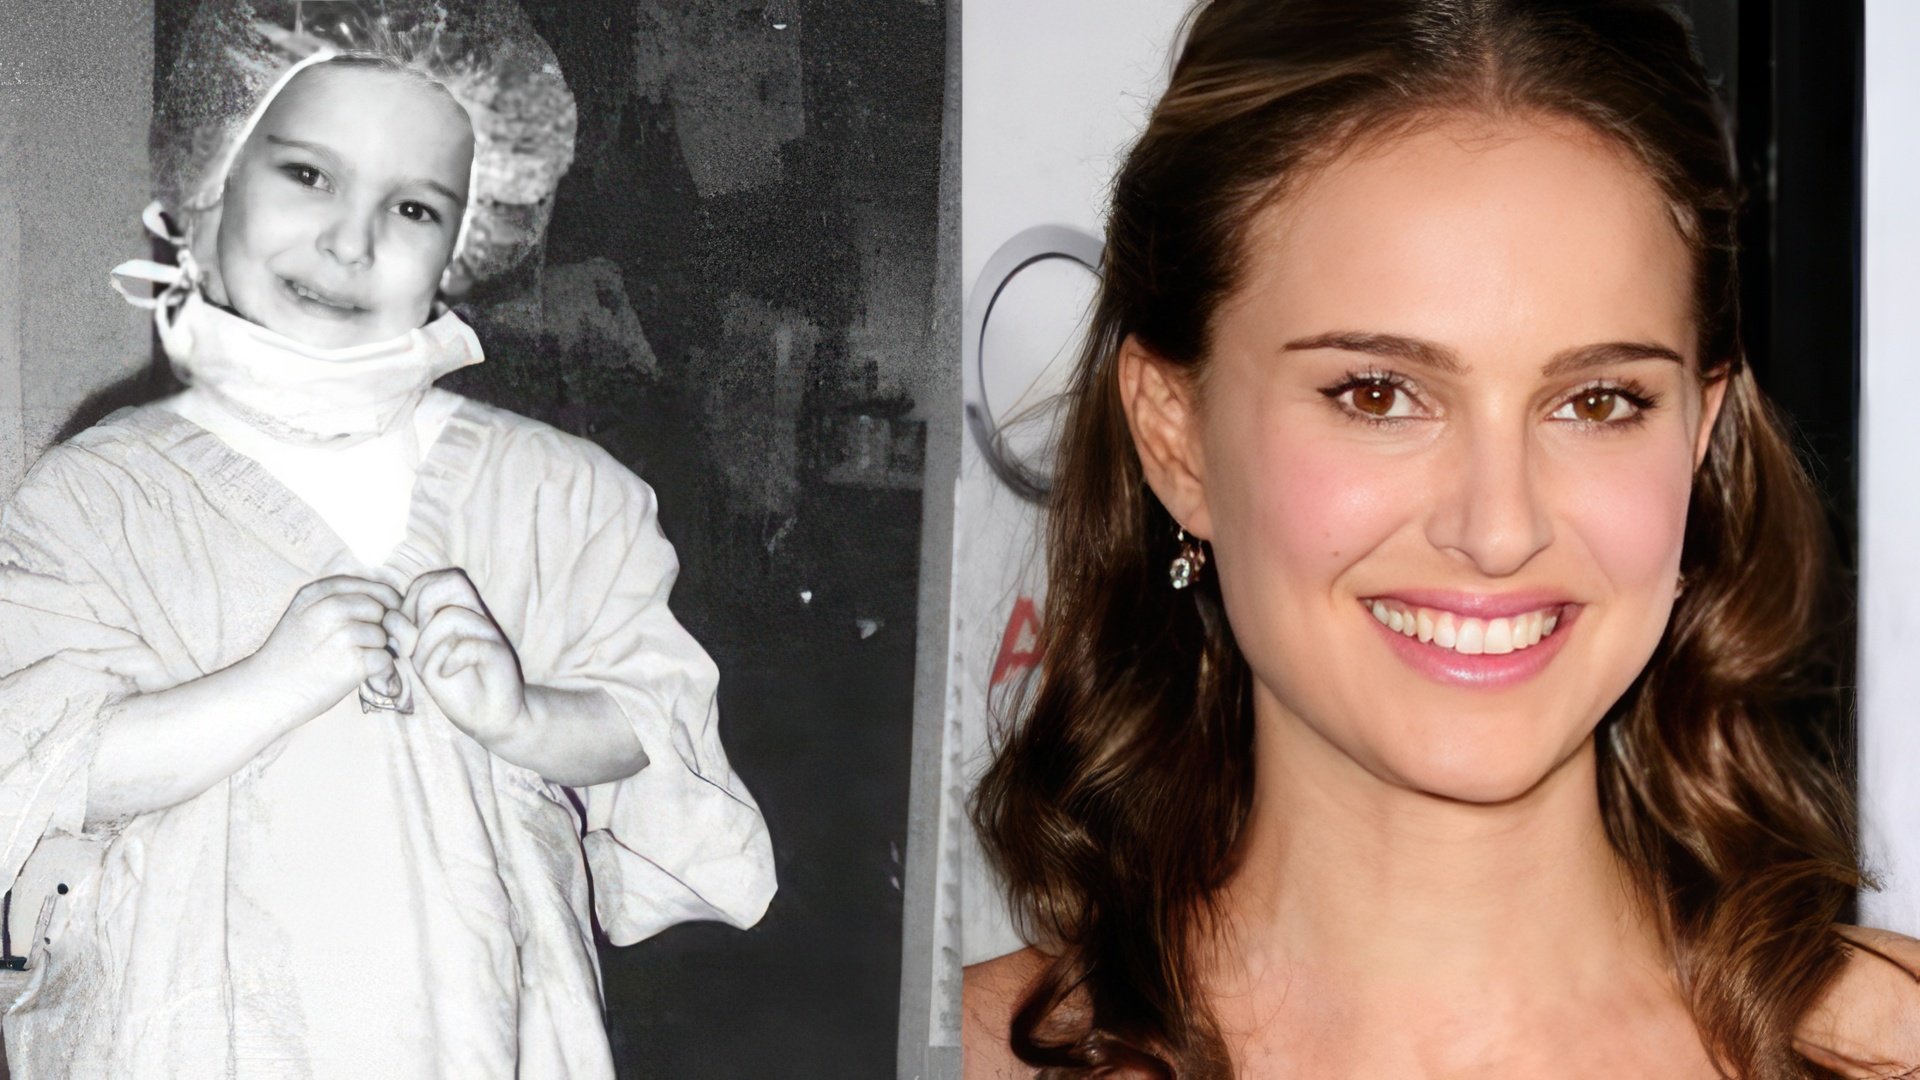 Natalie Portman in childhood and now